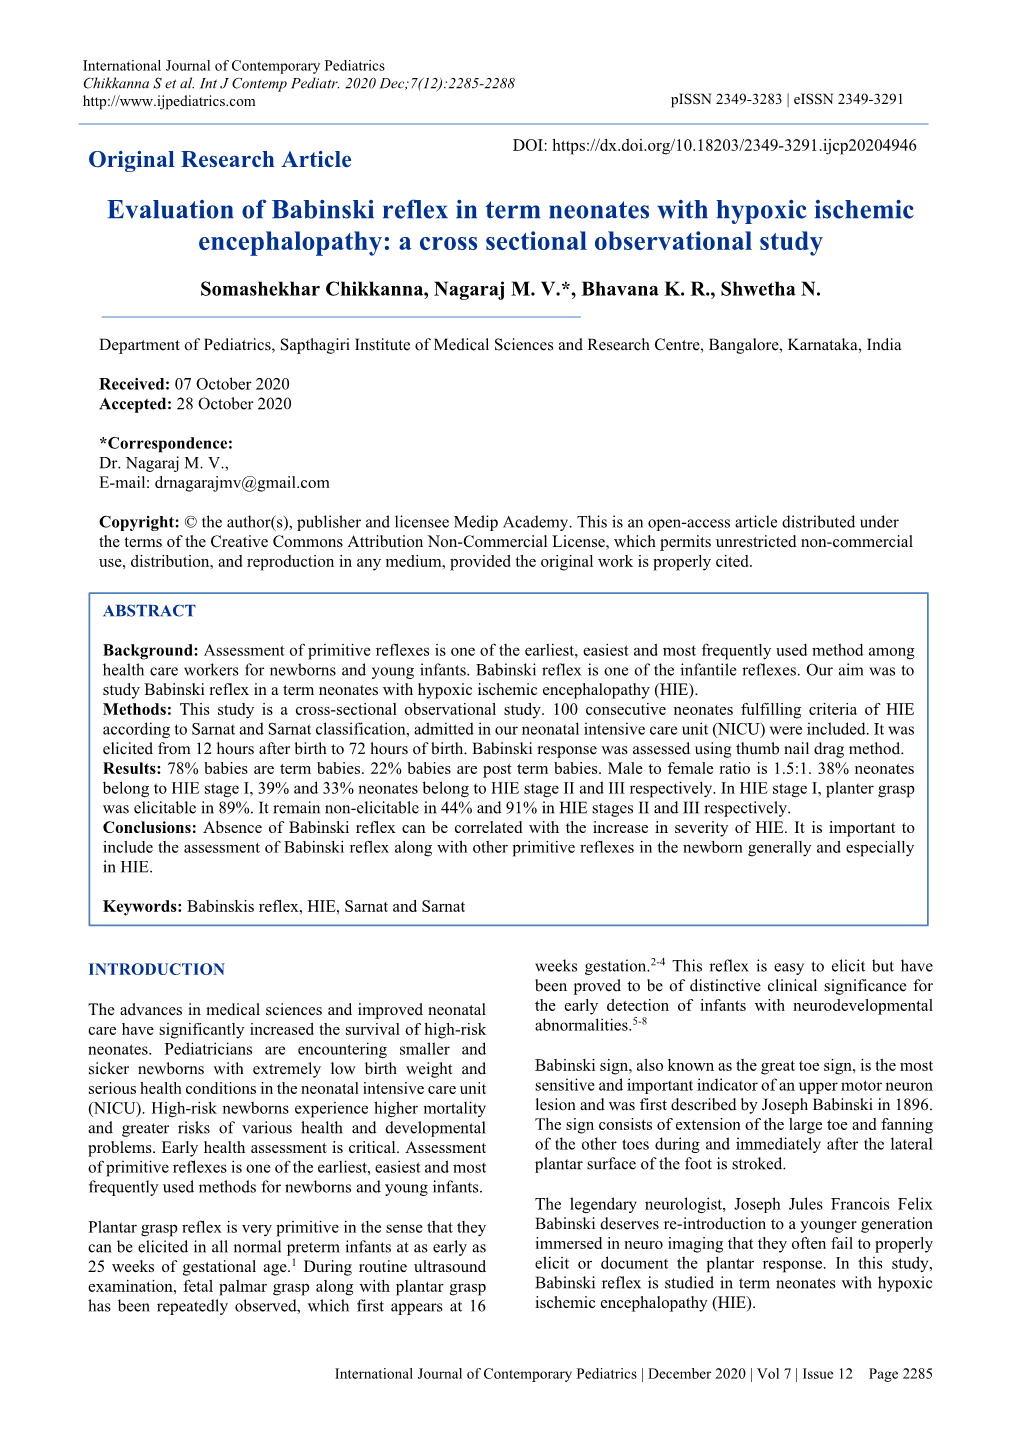 Evaluation of Babinski Reflex in Term Neonates with Hypoxic Ischemic Encephalopathy: a Cross Sectional Observational Study